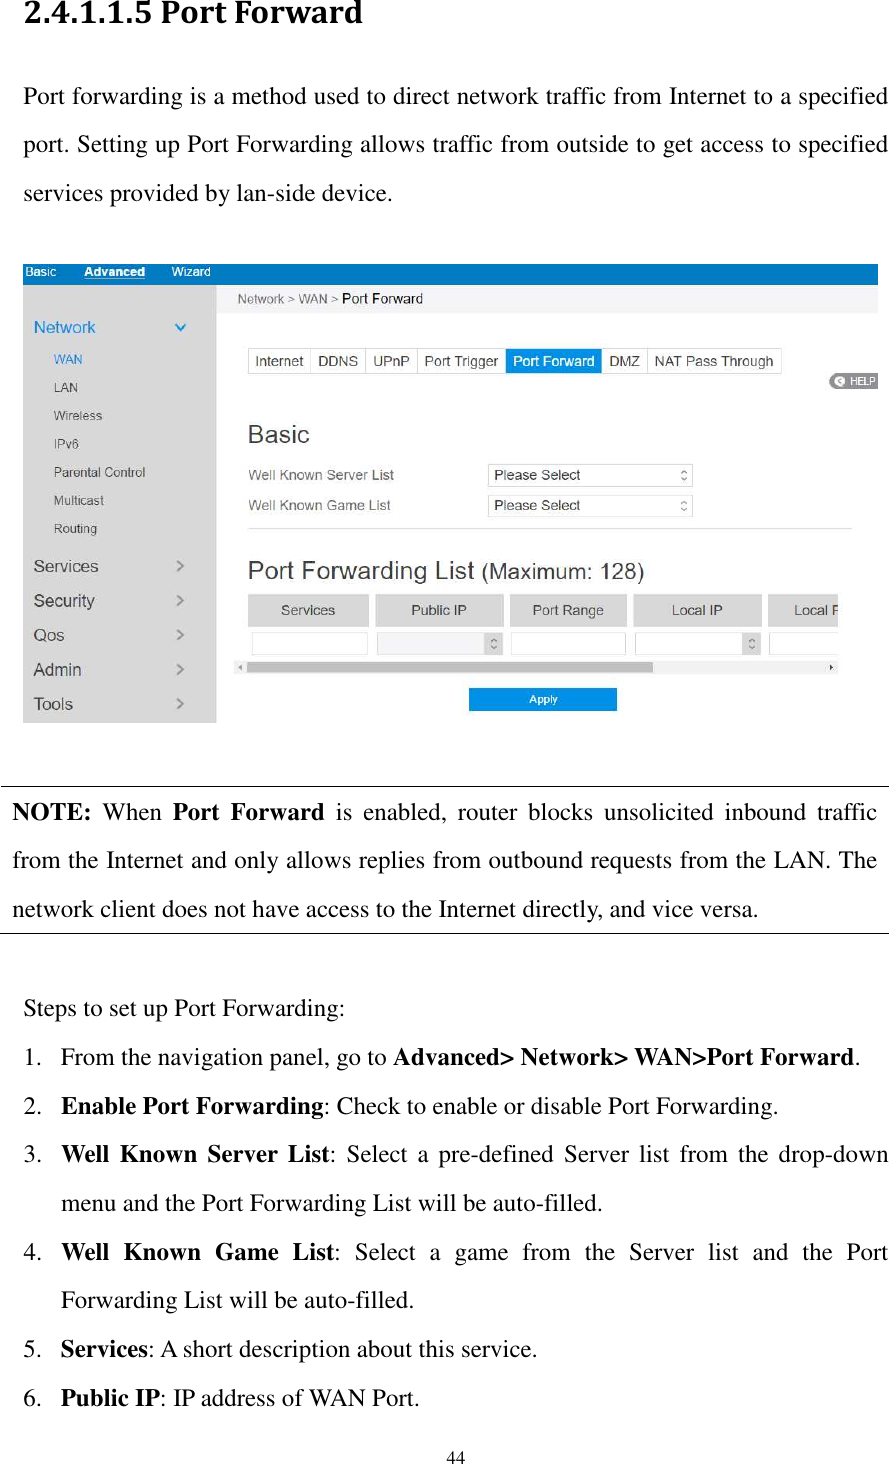  44 2.4.1.1.5 Port Forward Port forwarding is a method used to direct network traffic from Internet to a specified port. Setting up Port Forwarding allows traffic from outside to get access to specified services provided by lan-side device.      NOTE:  When  Port  Forward  is  enabled,  router  blocks  unsolicited  inbound  traffic from the Internet and only allows replies from outbound requests from the LAN. The network client does not have access to the Internet directly, and vice versa.  Steps to set up Port Forwarding: 1. From the navigation panel, go to Advanced&gt; Network&gt; WAN&gt;Port Forward. 2. Enable Port Forwarding: Check to enable or disable Port Forwarding. 3. Well Known Server List:  Select a pre-defined  Server list  from  the  drop-down menu and the Port Forwarding List will be auto-filled. 4. Well  Known  Game  List:  Select  a  game  from  the  Server  list  and  the  Port Forwarding List will be auto-filled. 5. Services: A short description about this service. 6. Public IP: IP address of WAN Port. 